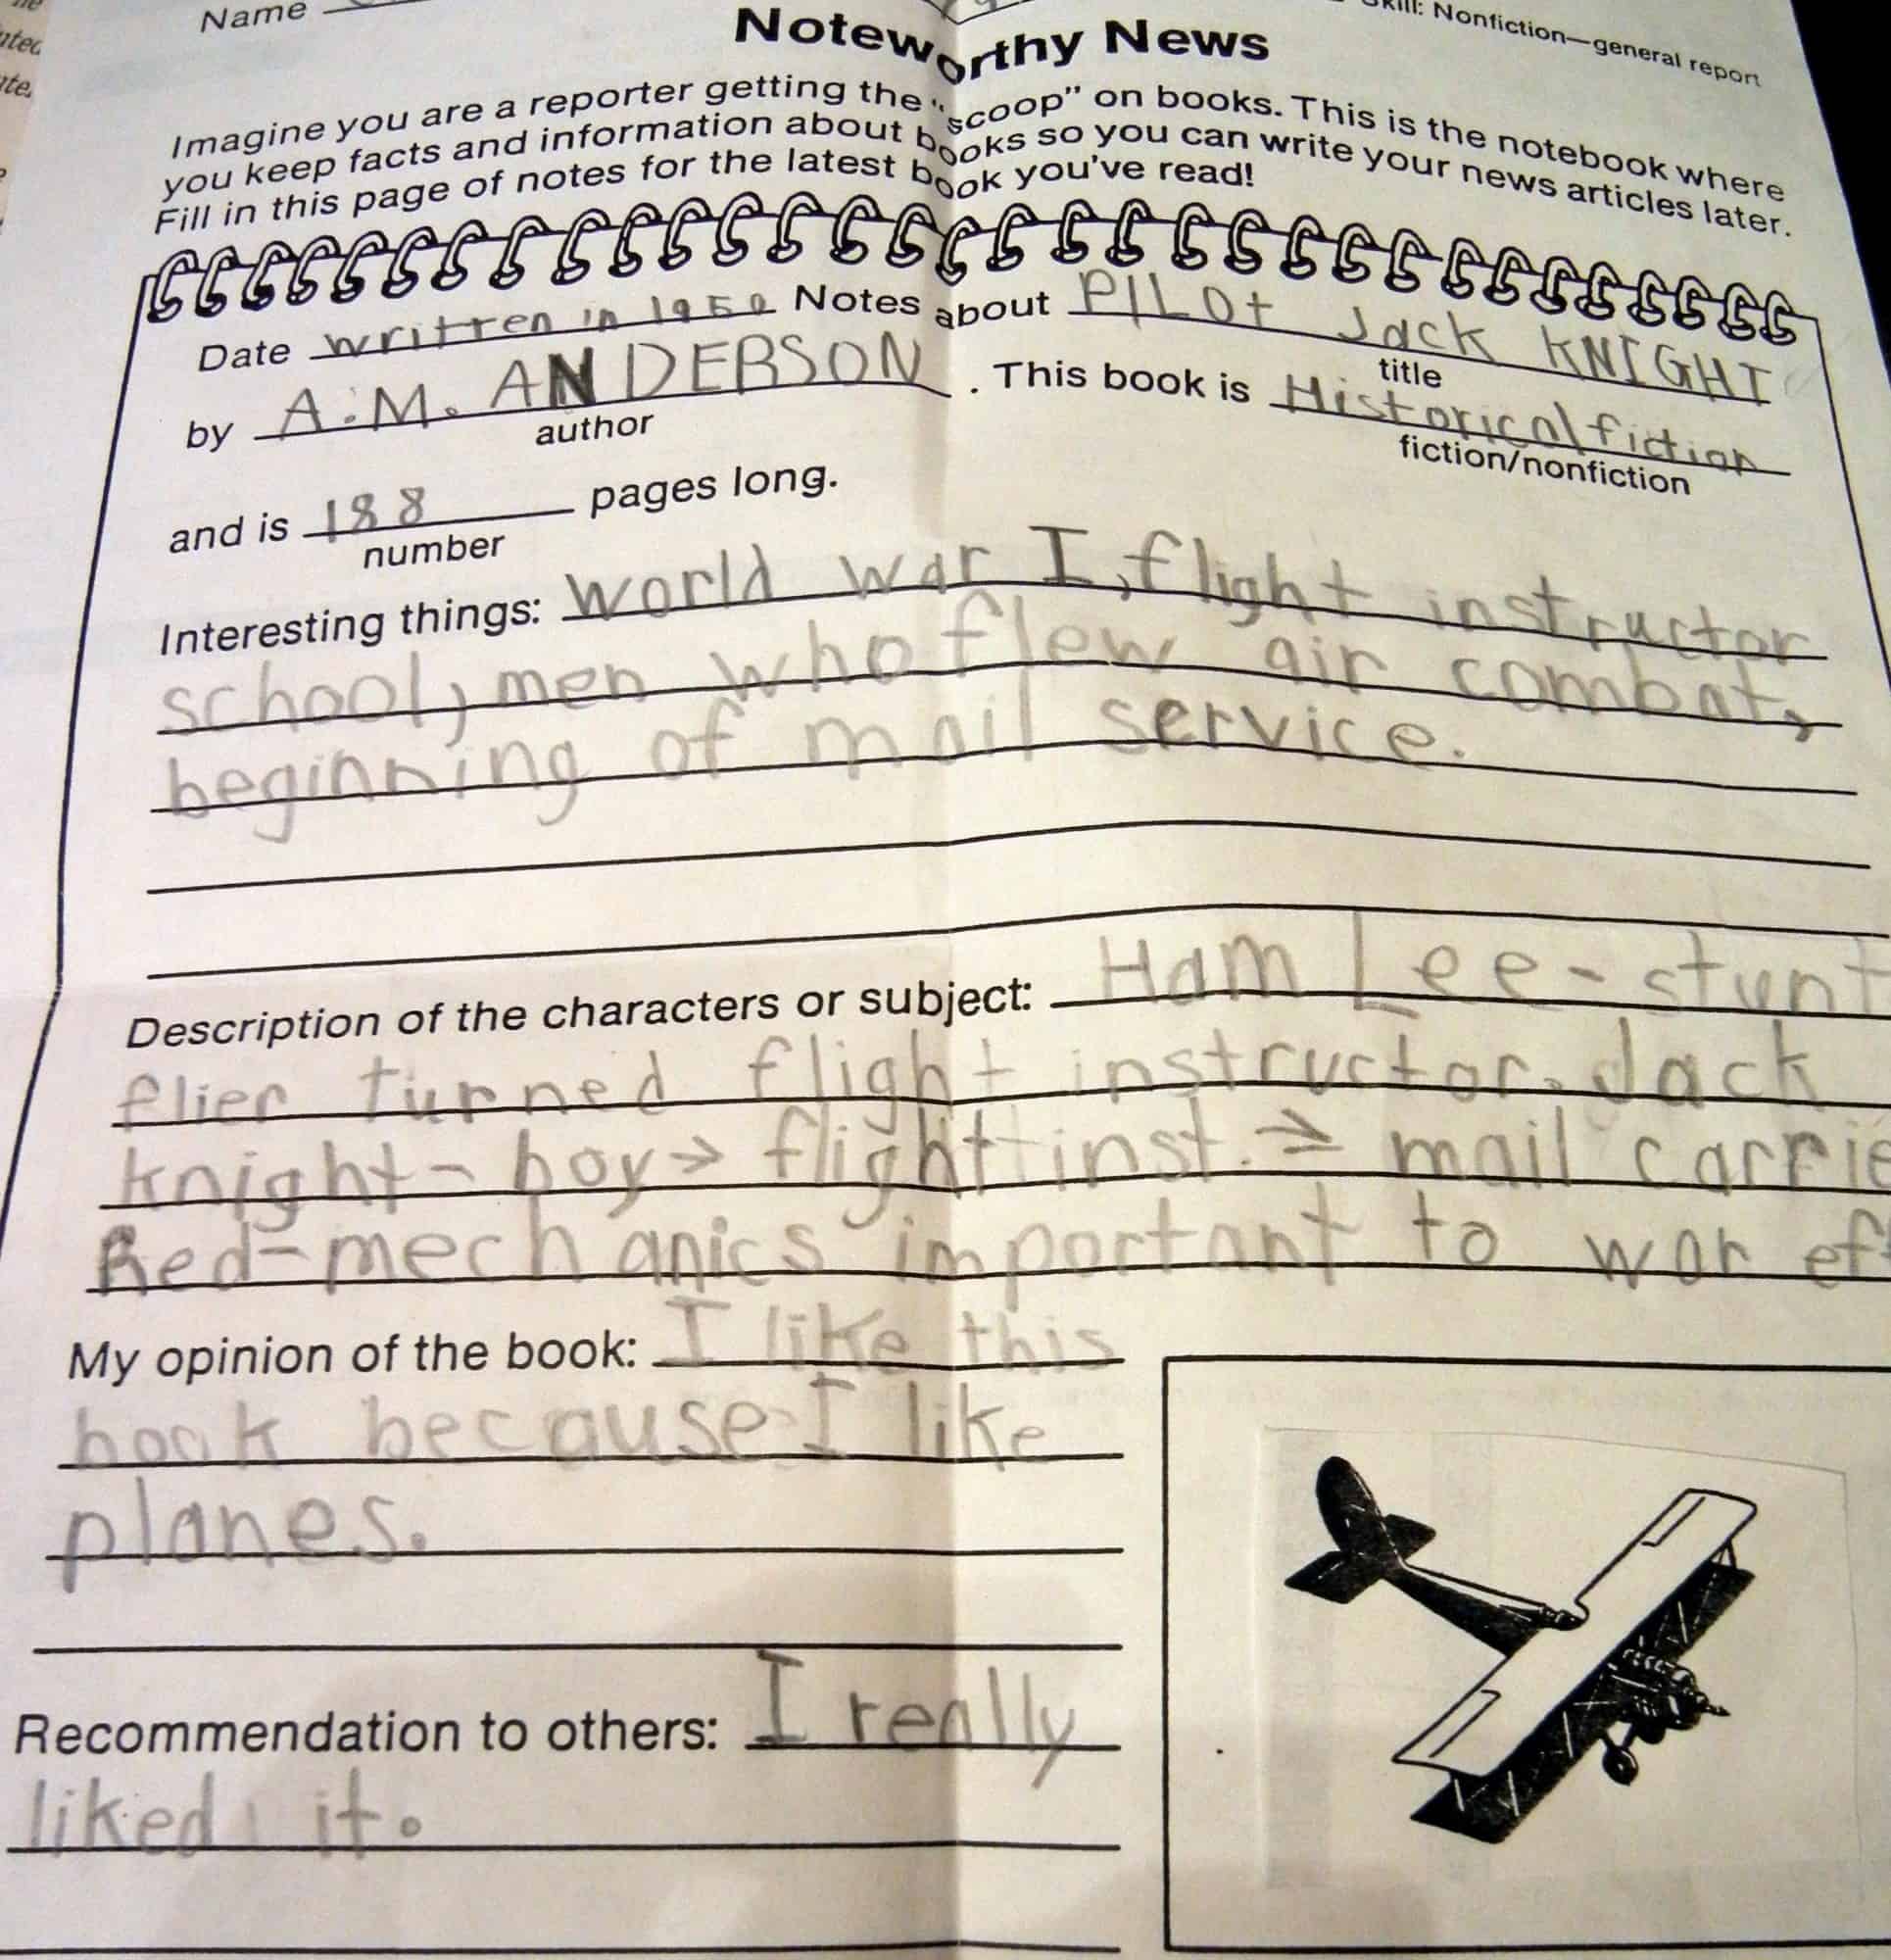  School work and journaling about flight.